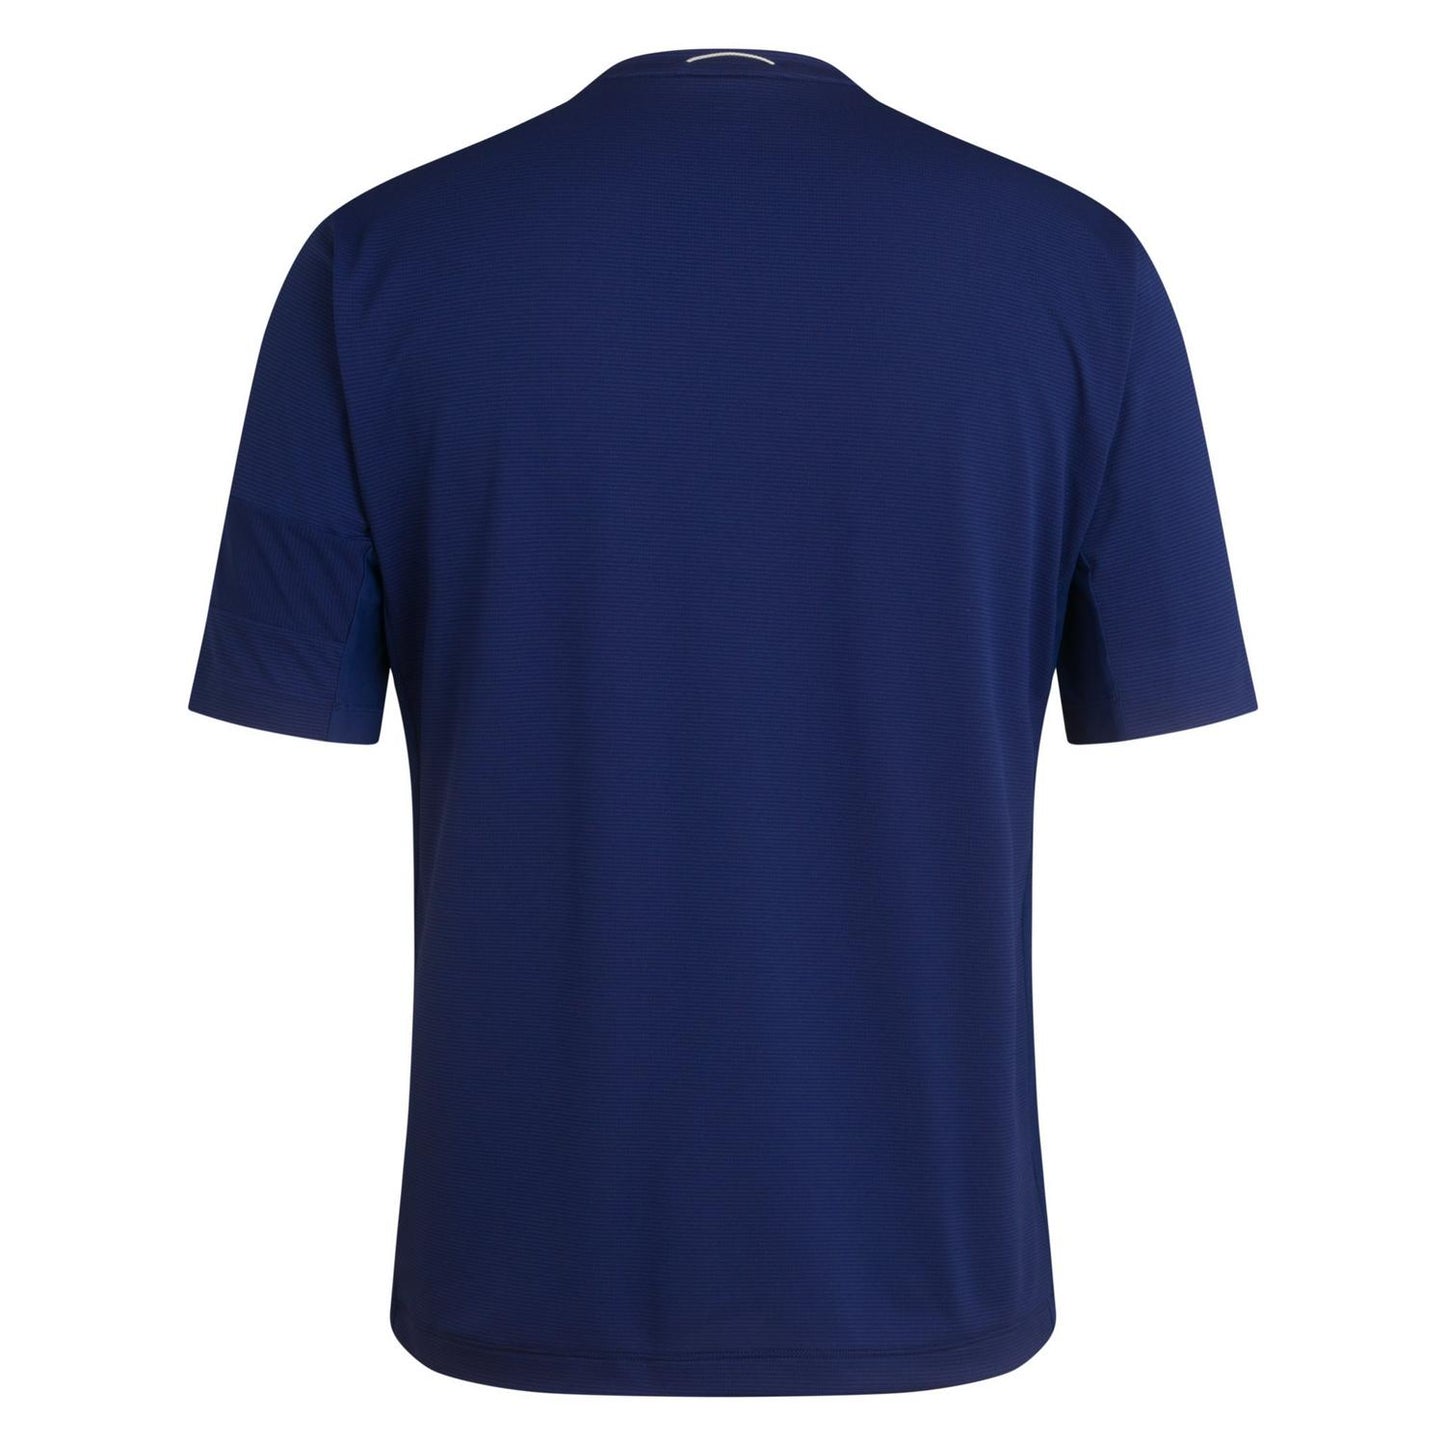 RAPHA Explore Technical Tshirt AW2023 - NVO Navy/Off White